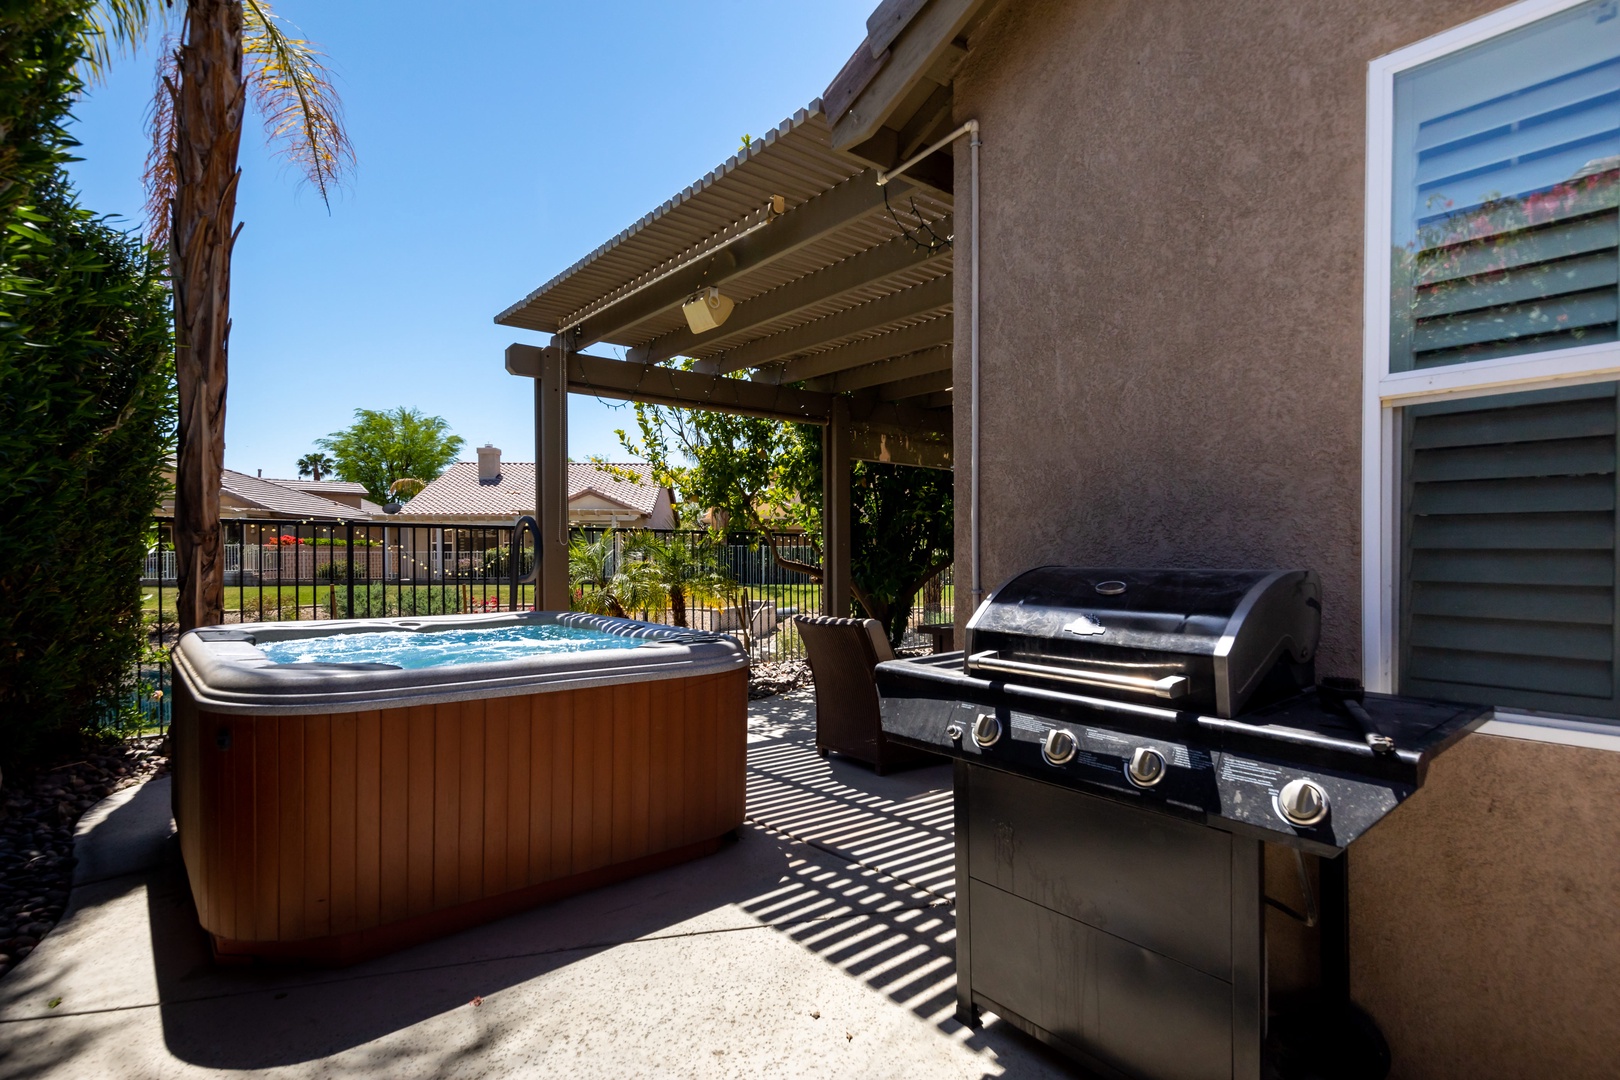 Hot tub with outdoor gas BBQ grill